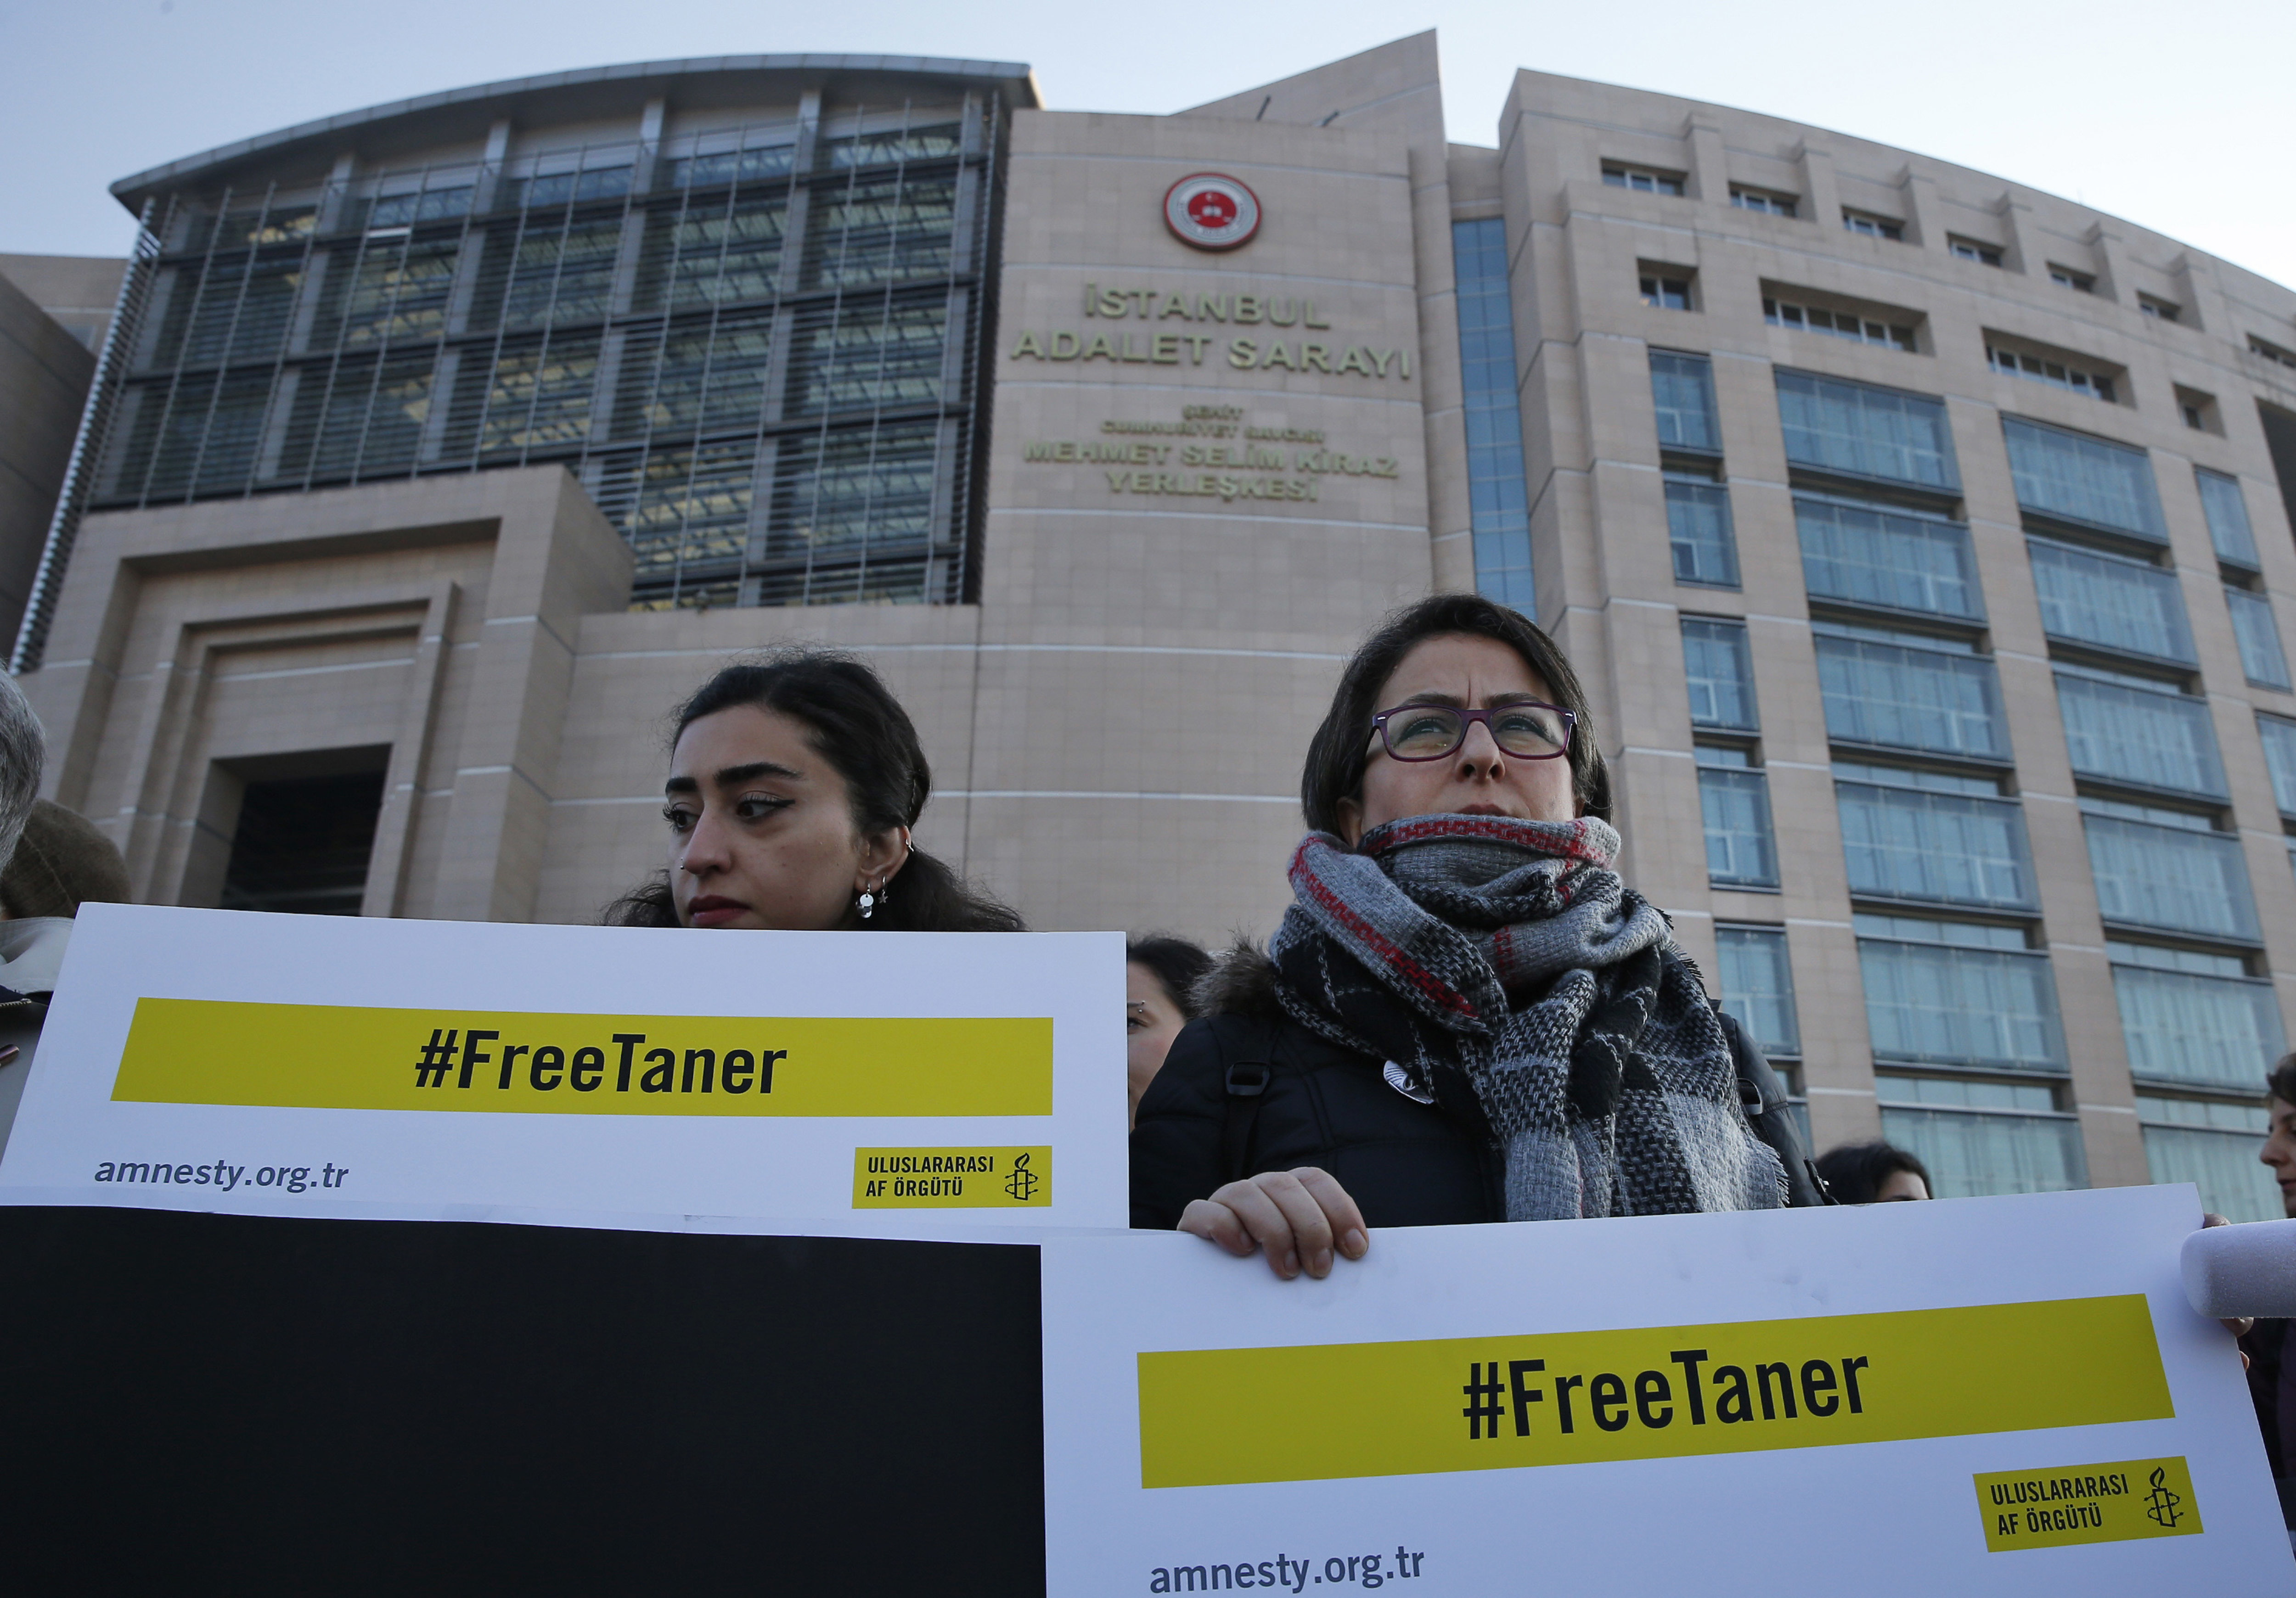 Human rights activists stage a protest outside a court in Istanbul, Wednesday, Jan. 31, 2018, where the trial of eleven human rights activists accused of belonging to and aiding terror groups is ongoing. The protesters demand the release of Amnesty's Turkey chairman Taner Kilic, who was imprisoned separately in June 2017, and goes on trial in the city of Izmir for alleged links to U.S.-based cleric Fethullah Gulen, blamed by the government for last year's coup attempt. (AP Photo/Lefteris Pitarakis)